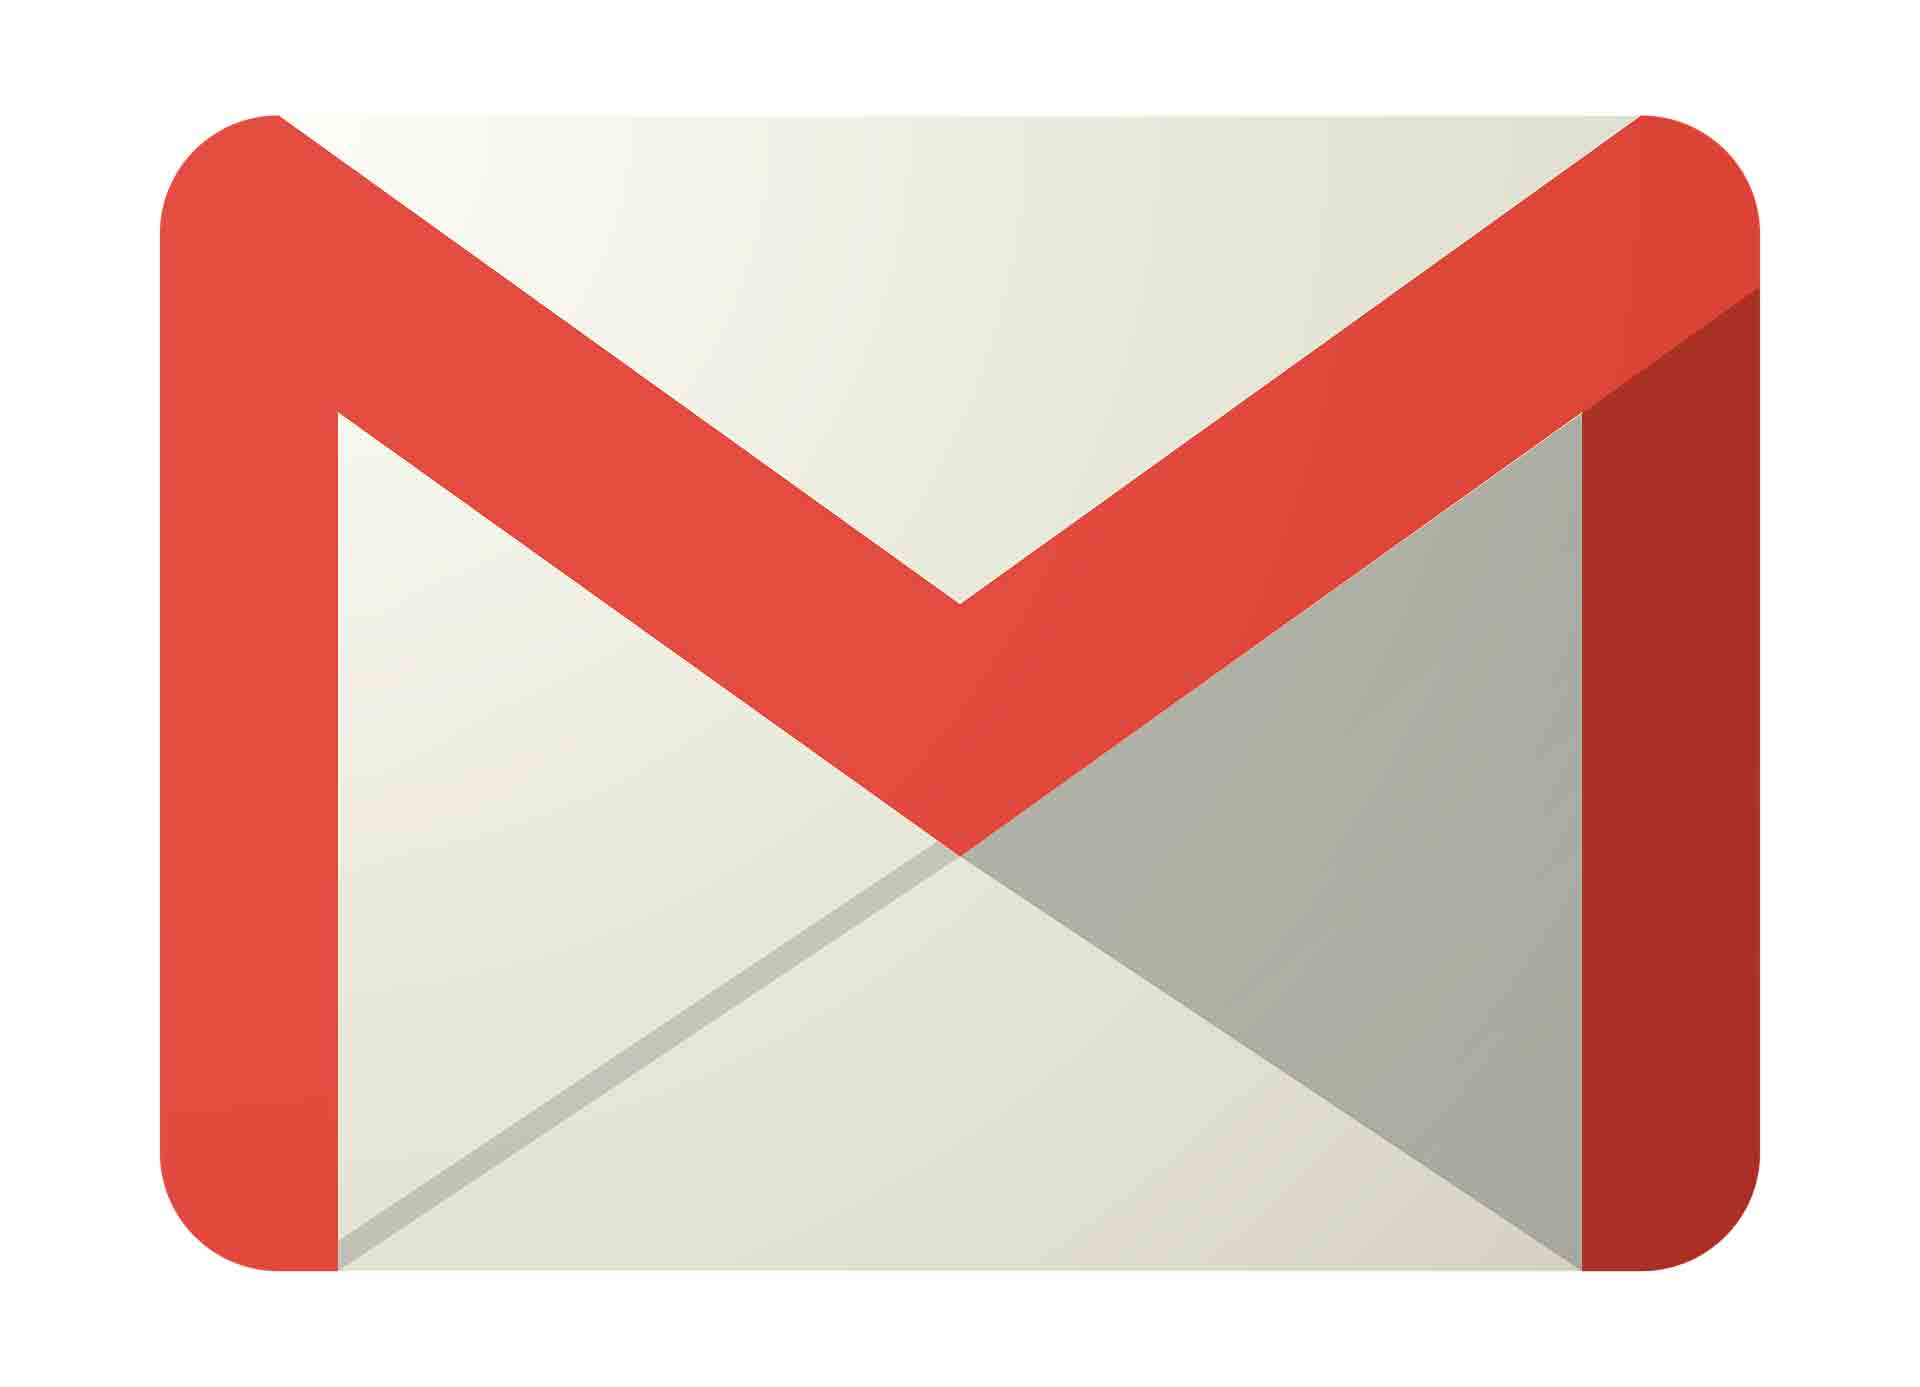 How to know if someone blocked you on Gmail?